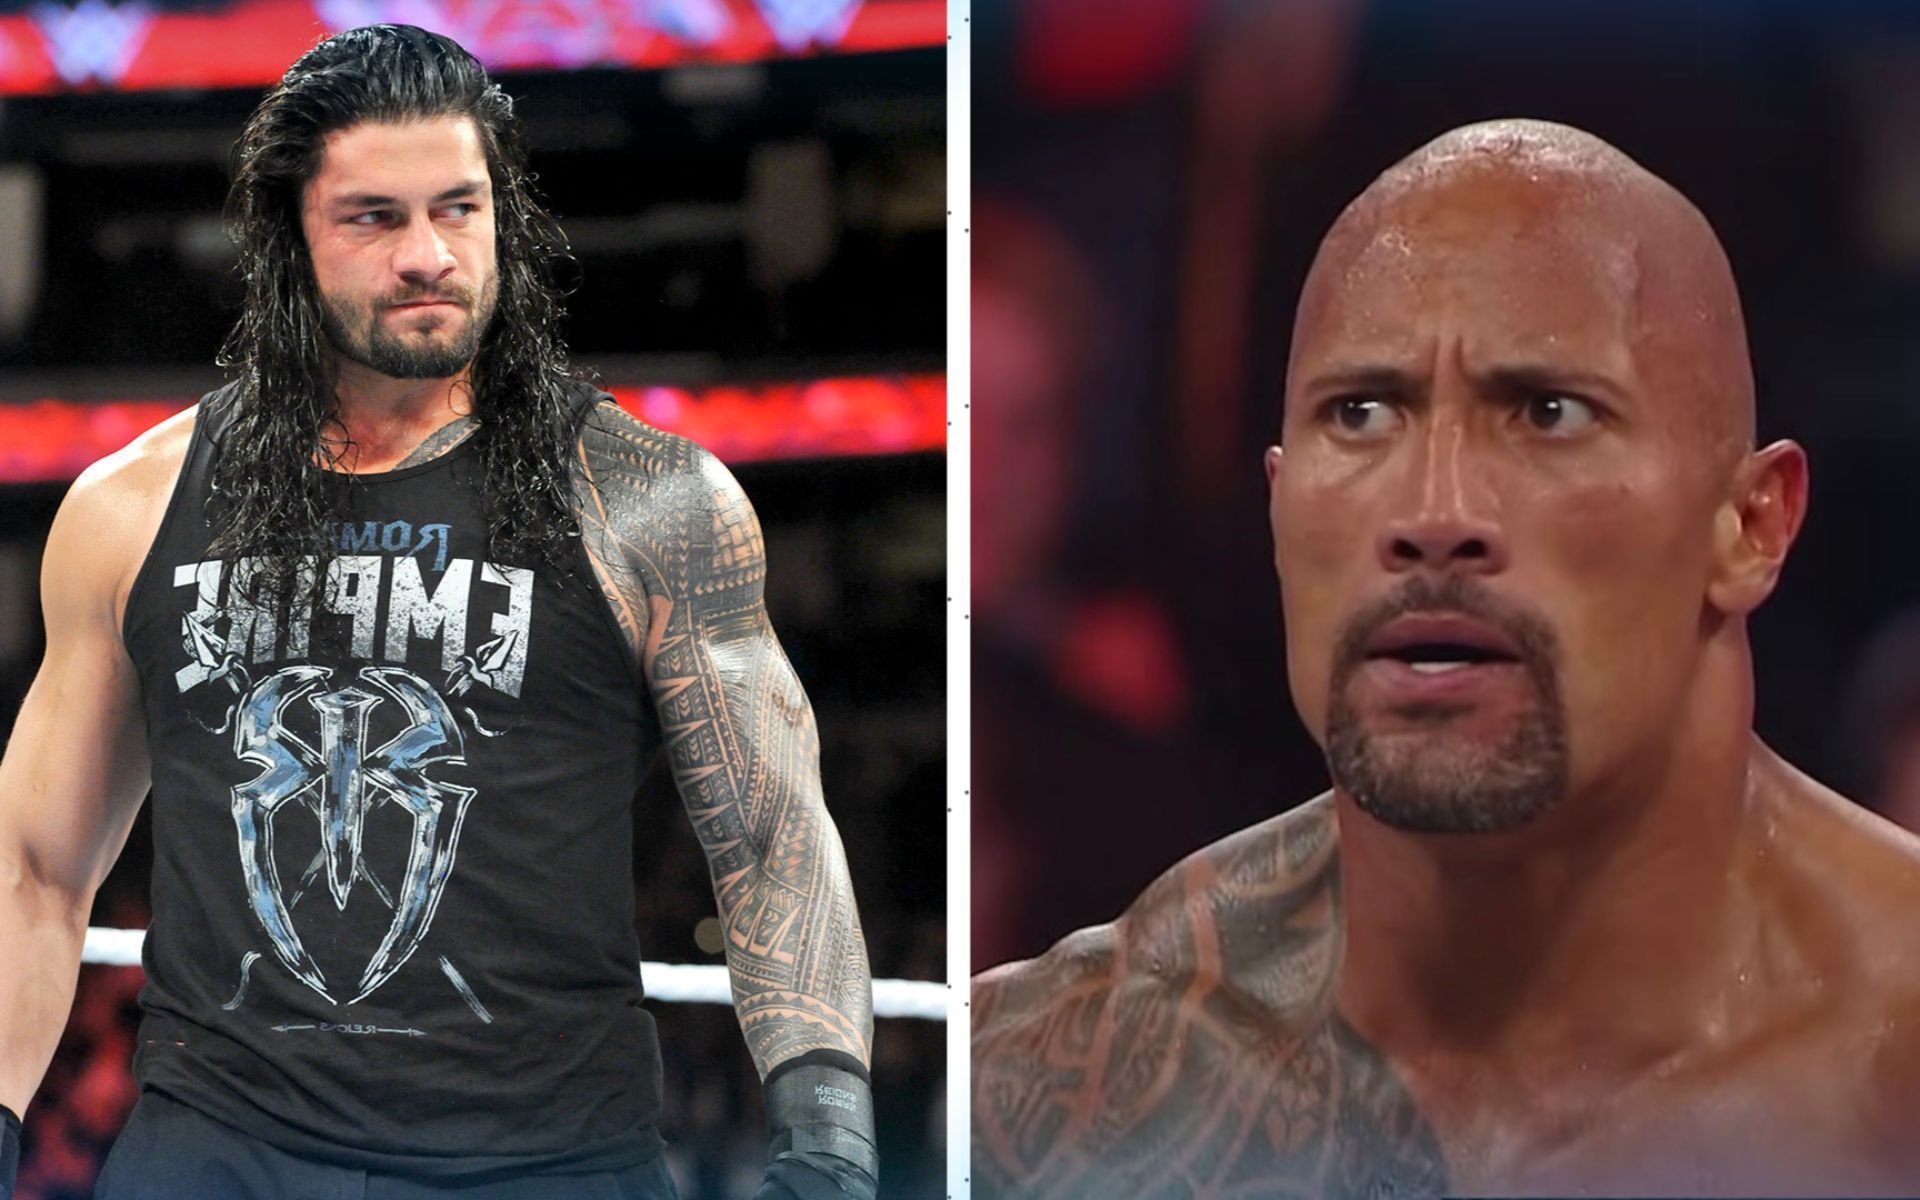 WWE Superstars, Roman Reigns and The Rock